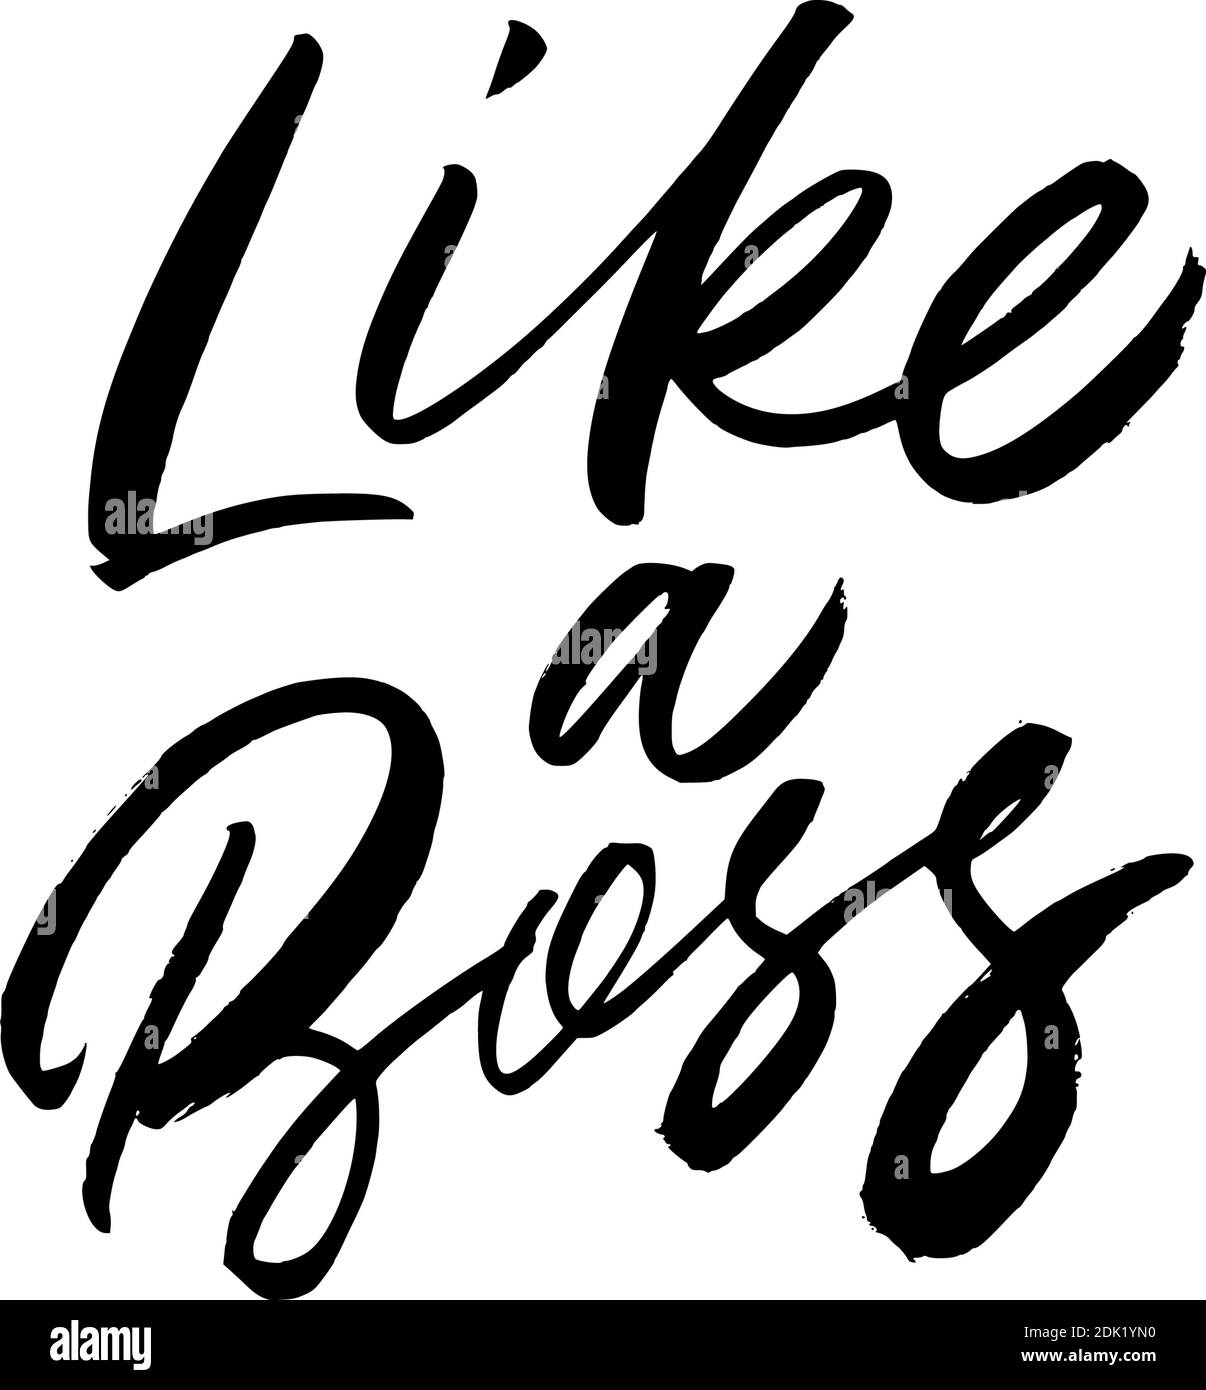 Like a boss hand drawn vector lettering Stock Vector